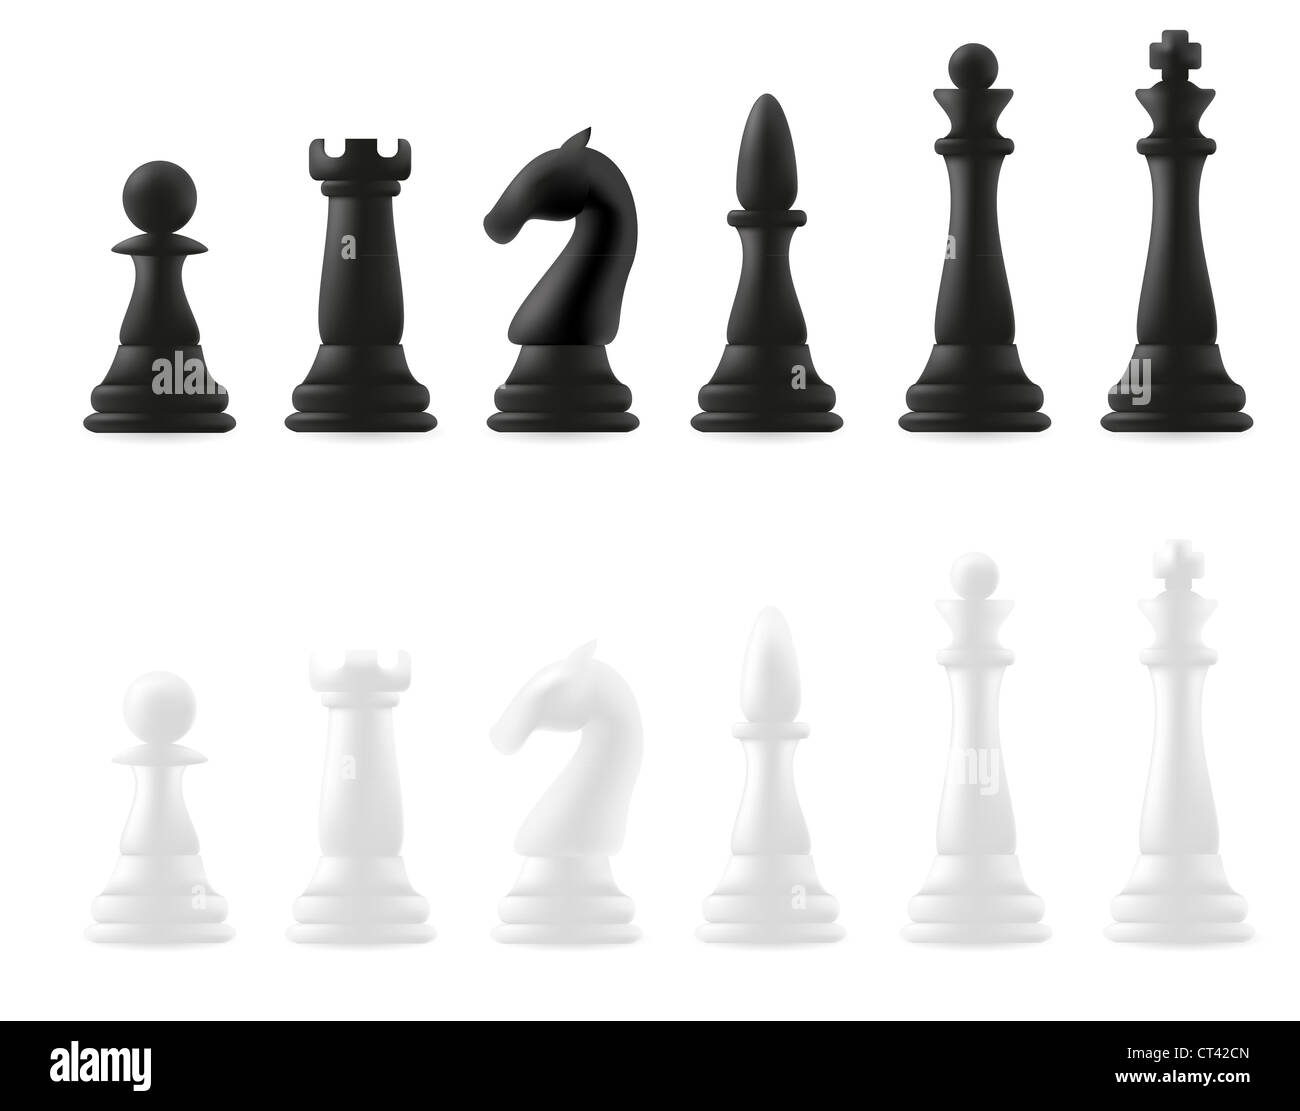 chess pieces illustration isolated on white background Stock Photo